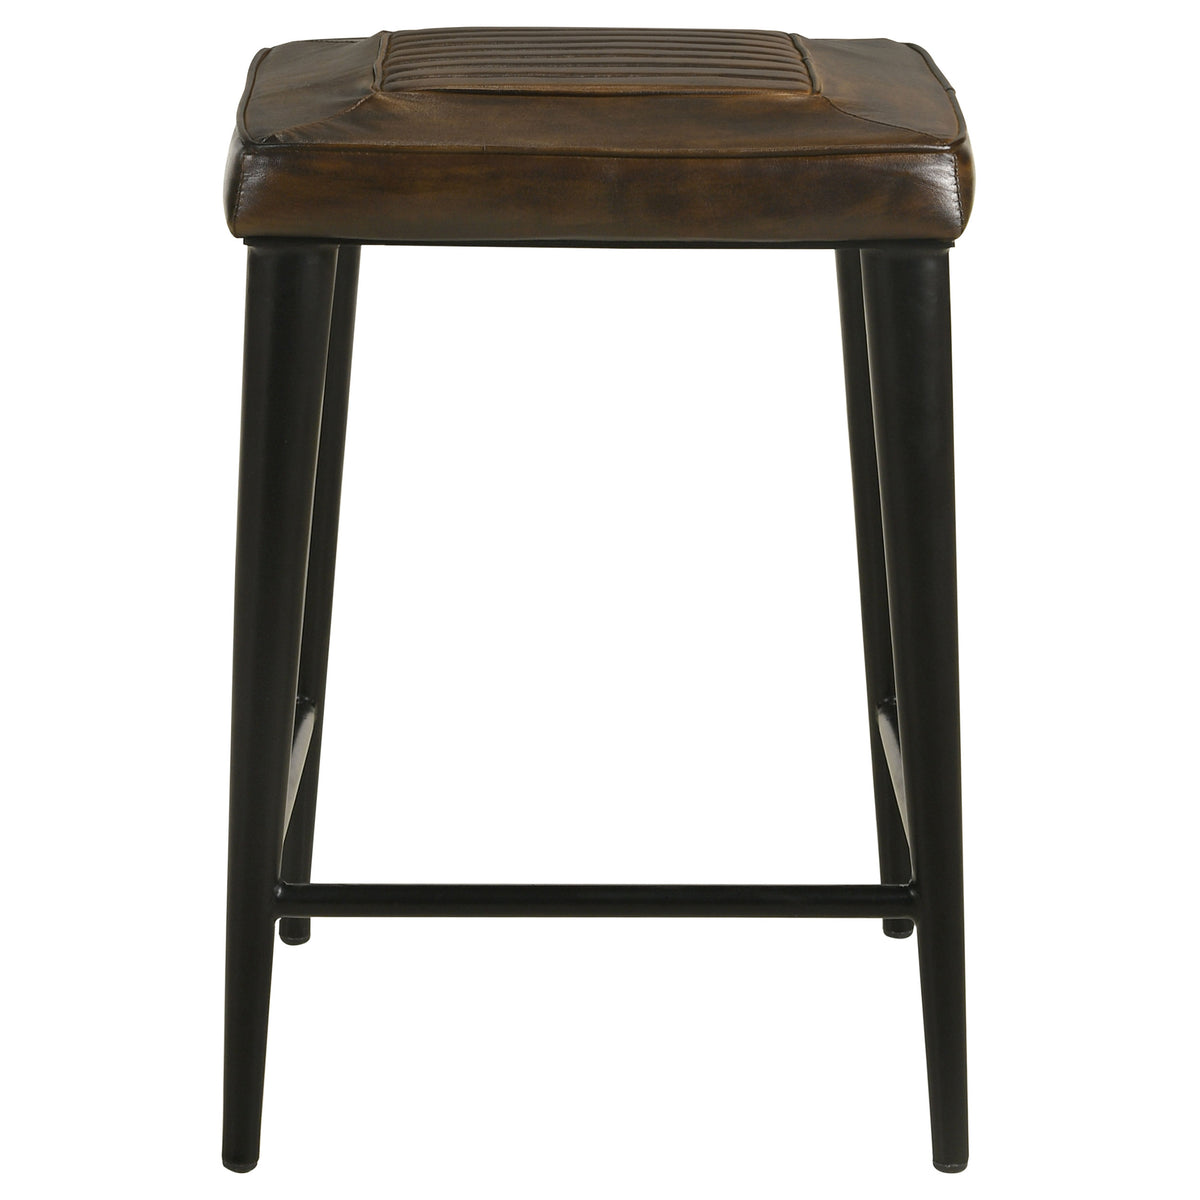 Alvaro Leather Upholstered Backless Counter Height Stool Antique Brown and Black (Set of 2) Alvaro Leather Upholstered Backless Counter Height Stool Antique Brown and Black (Set of 2) Half Price Furniture